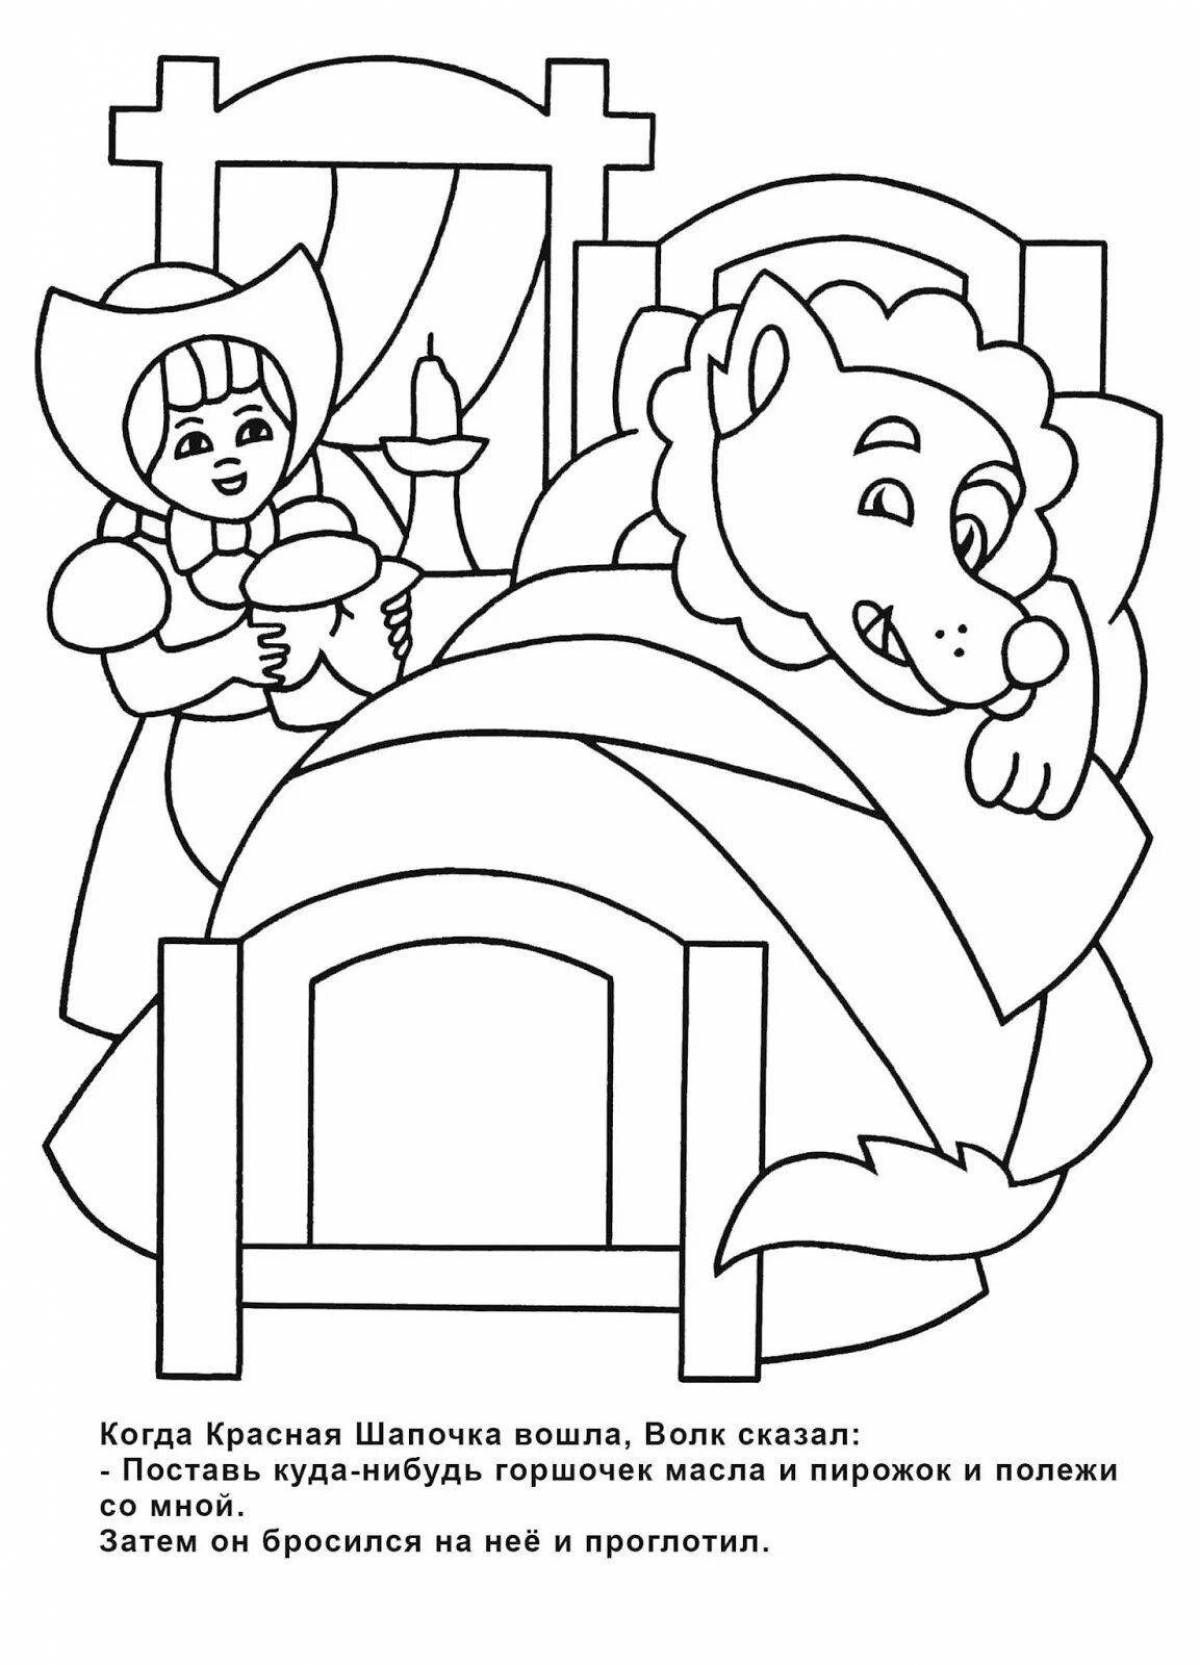 Colorful red riding hood coloring page